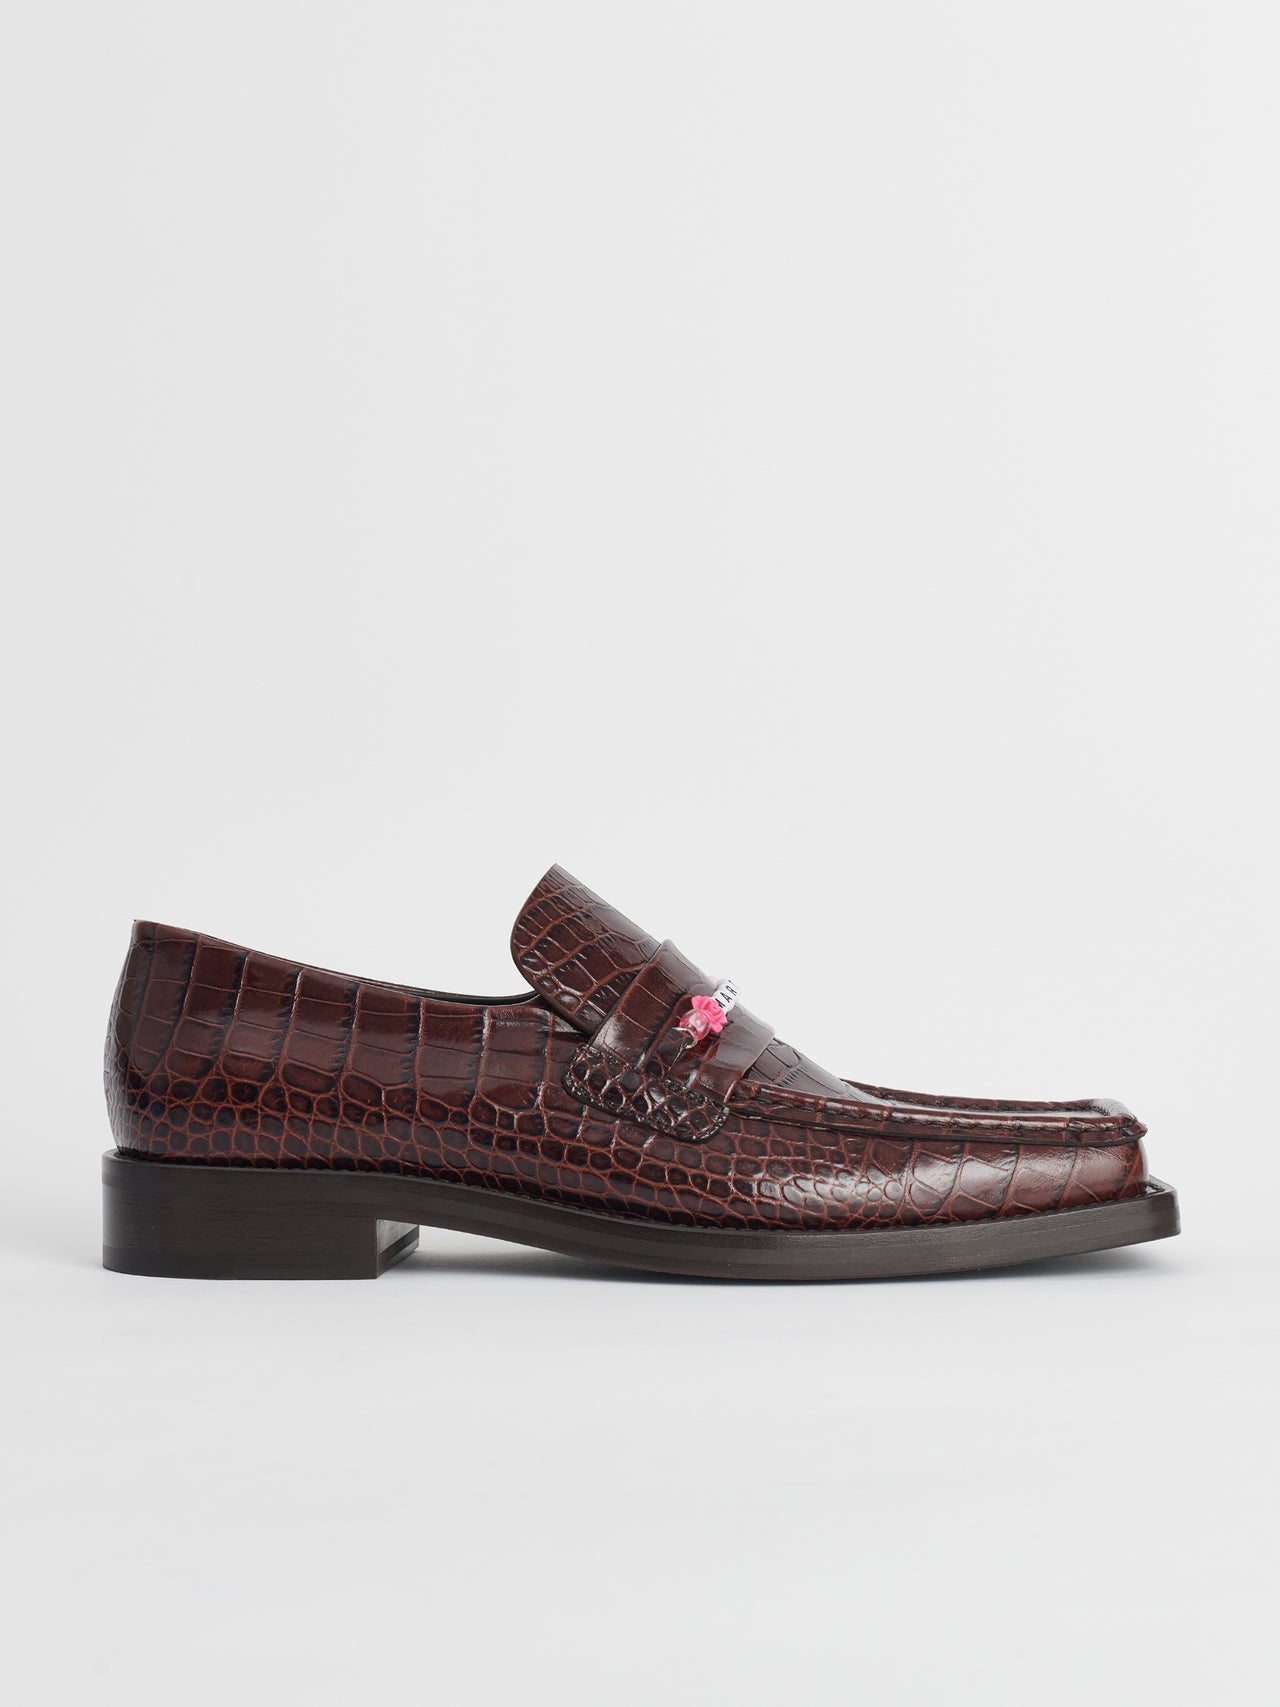 Martine Rose Beaded Square Toe Loafer Brown / Multi